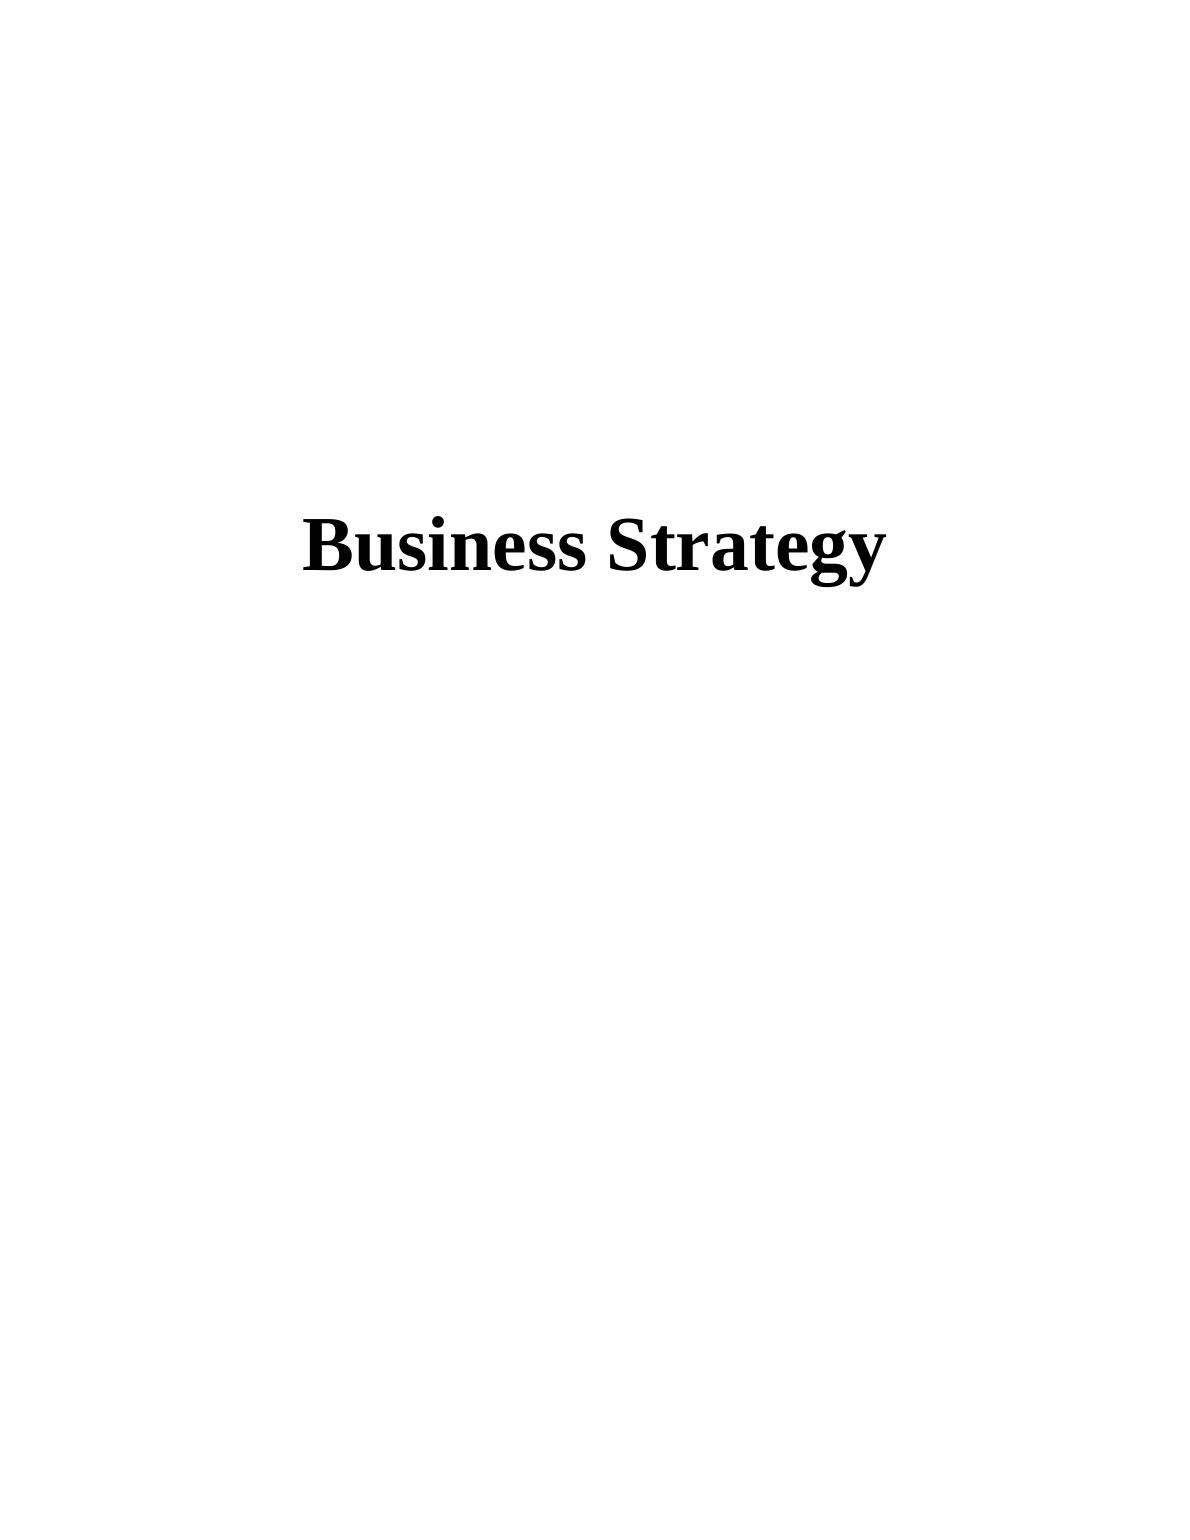 Business Strategy of L’oreal_1